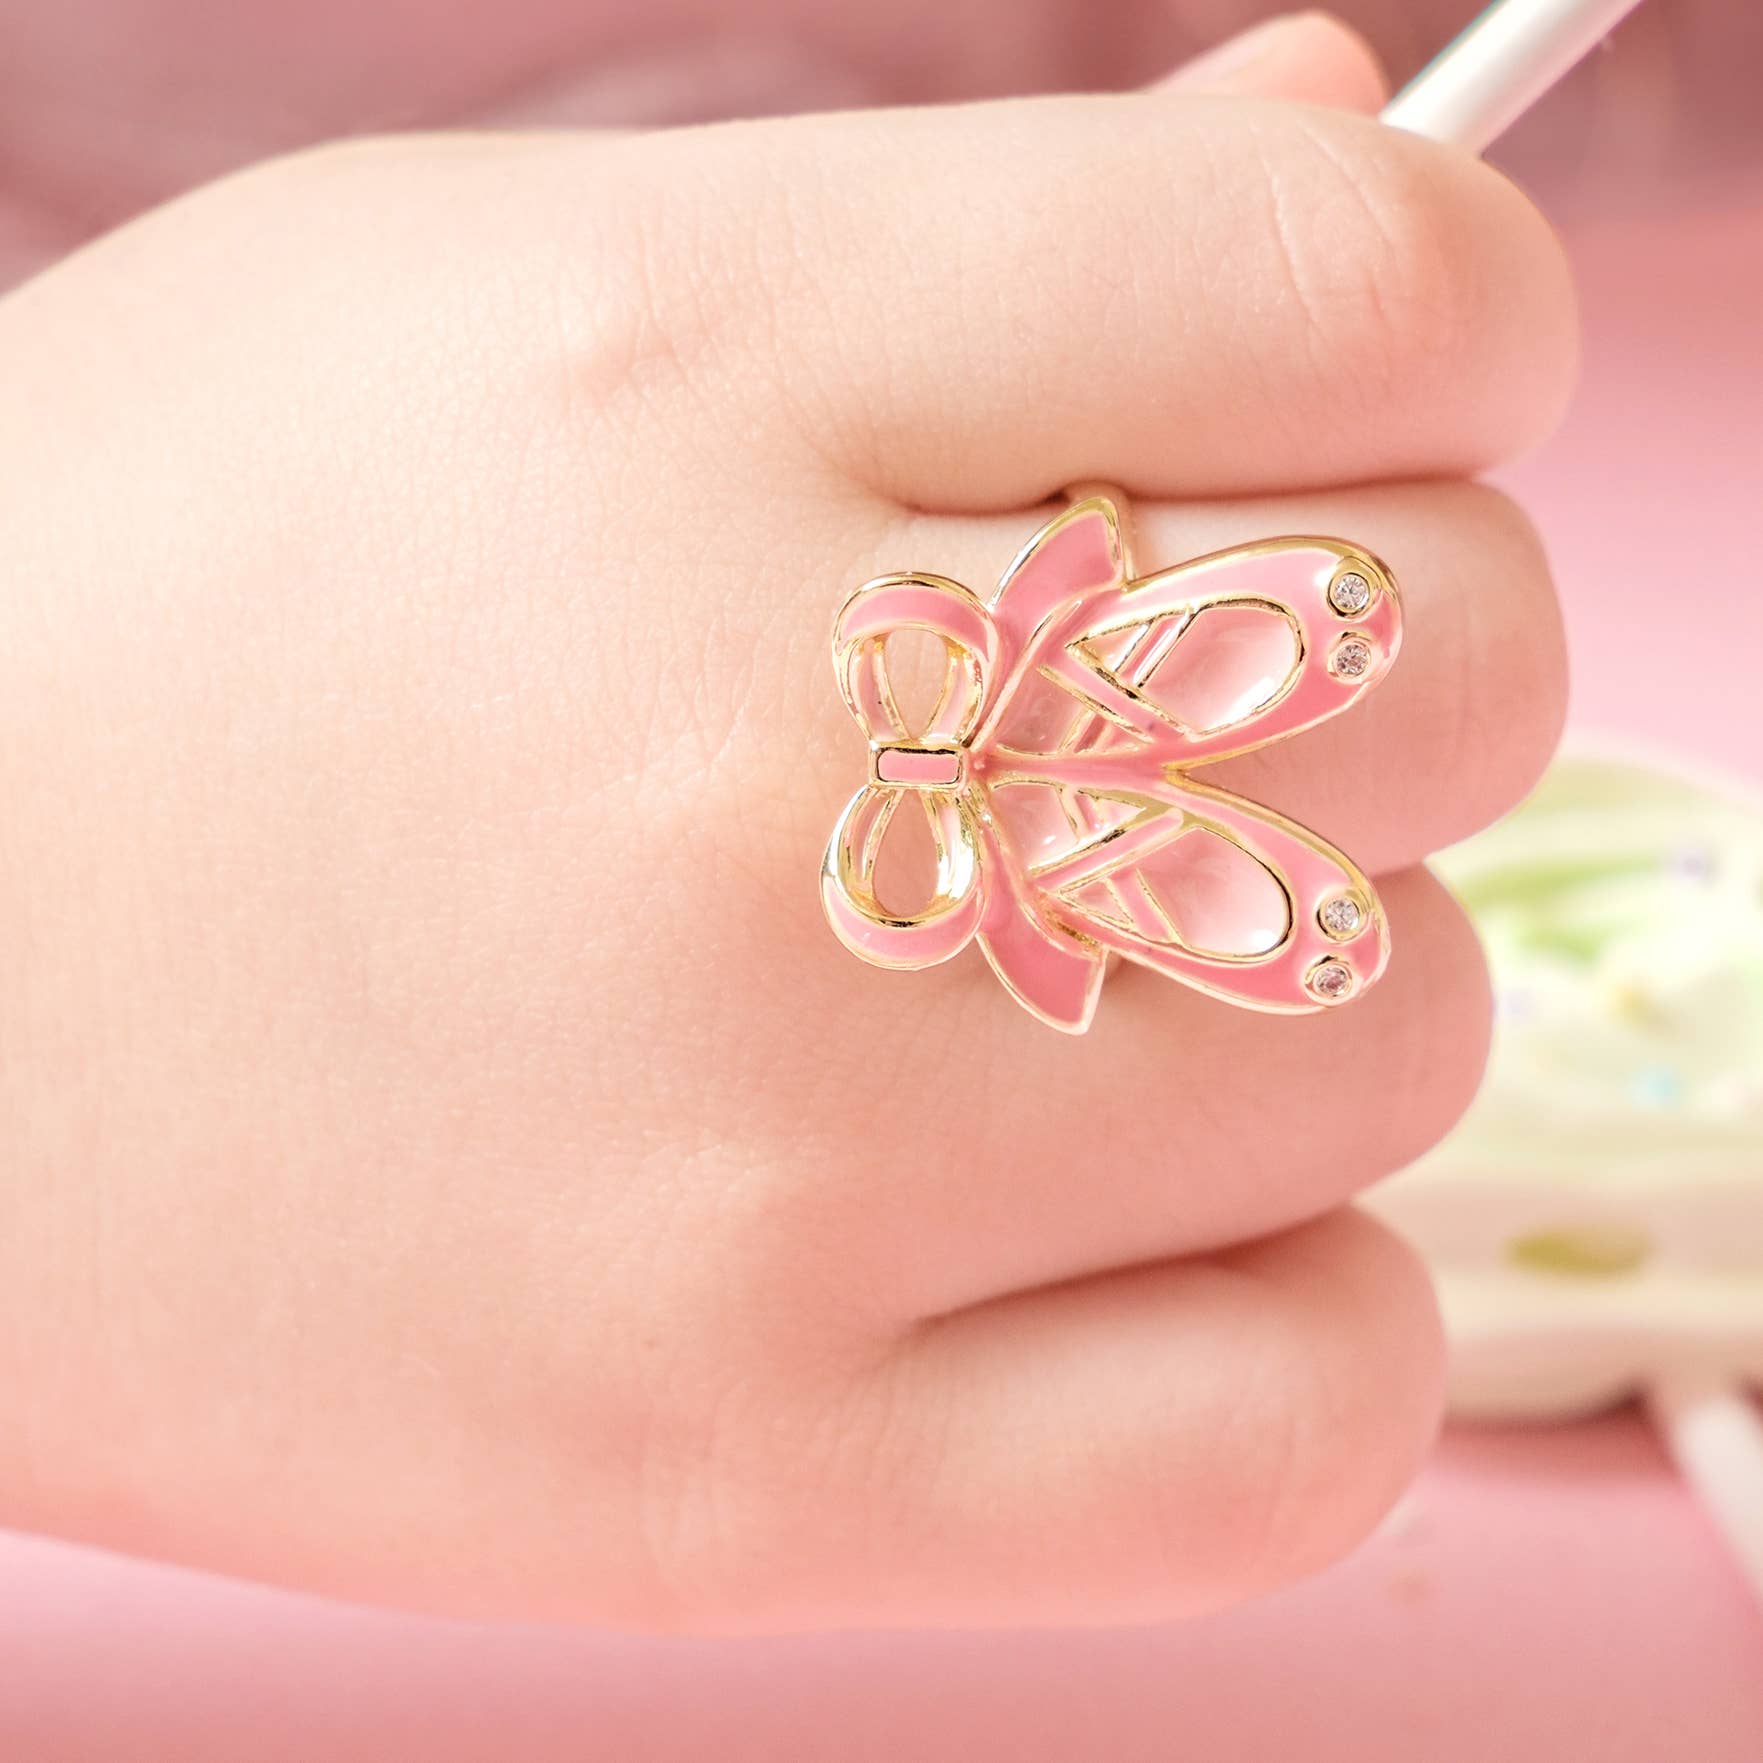 Twinkle Toes Adjustable Ring with Gift Box